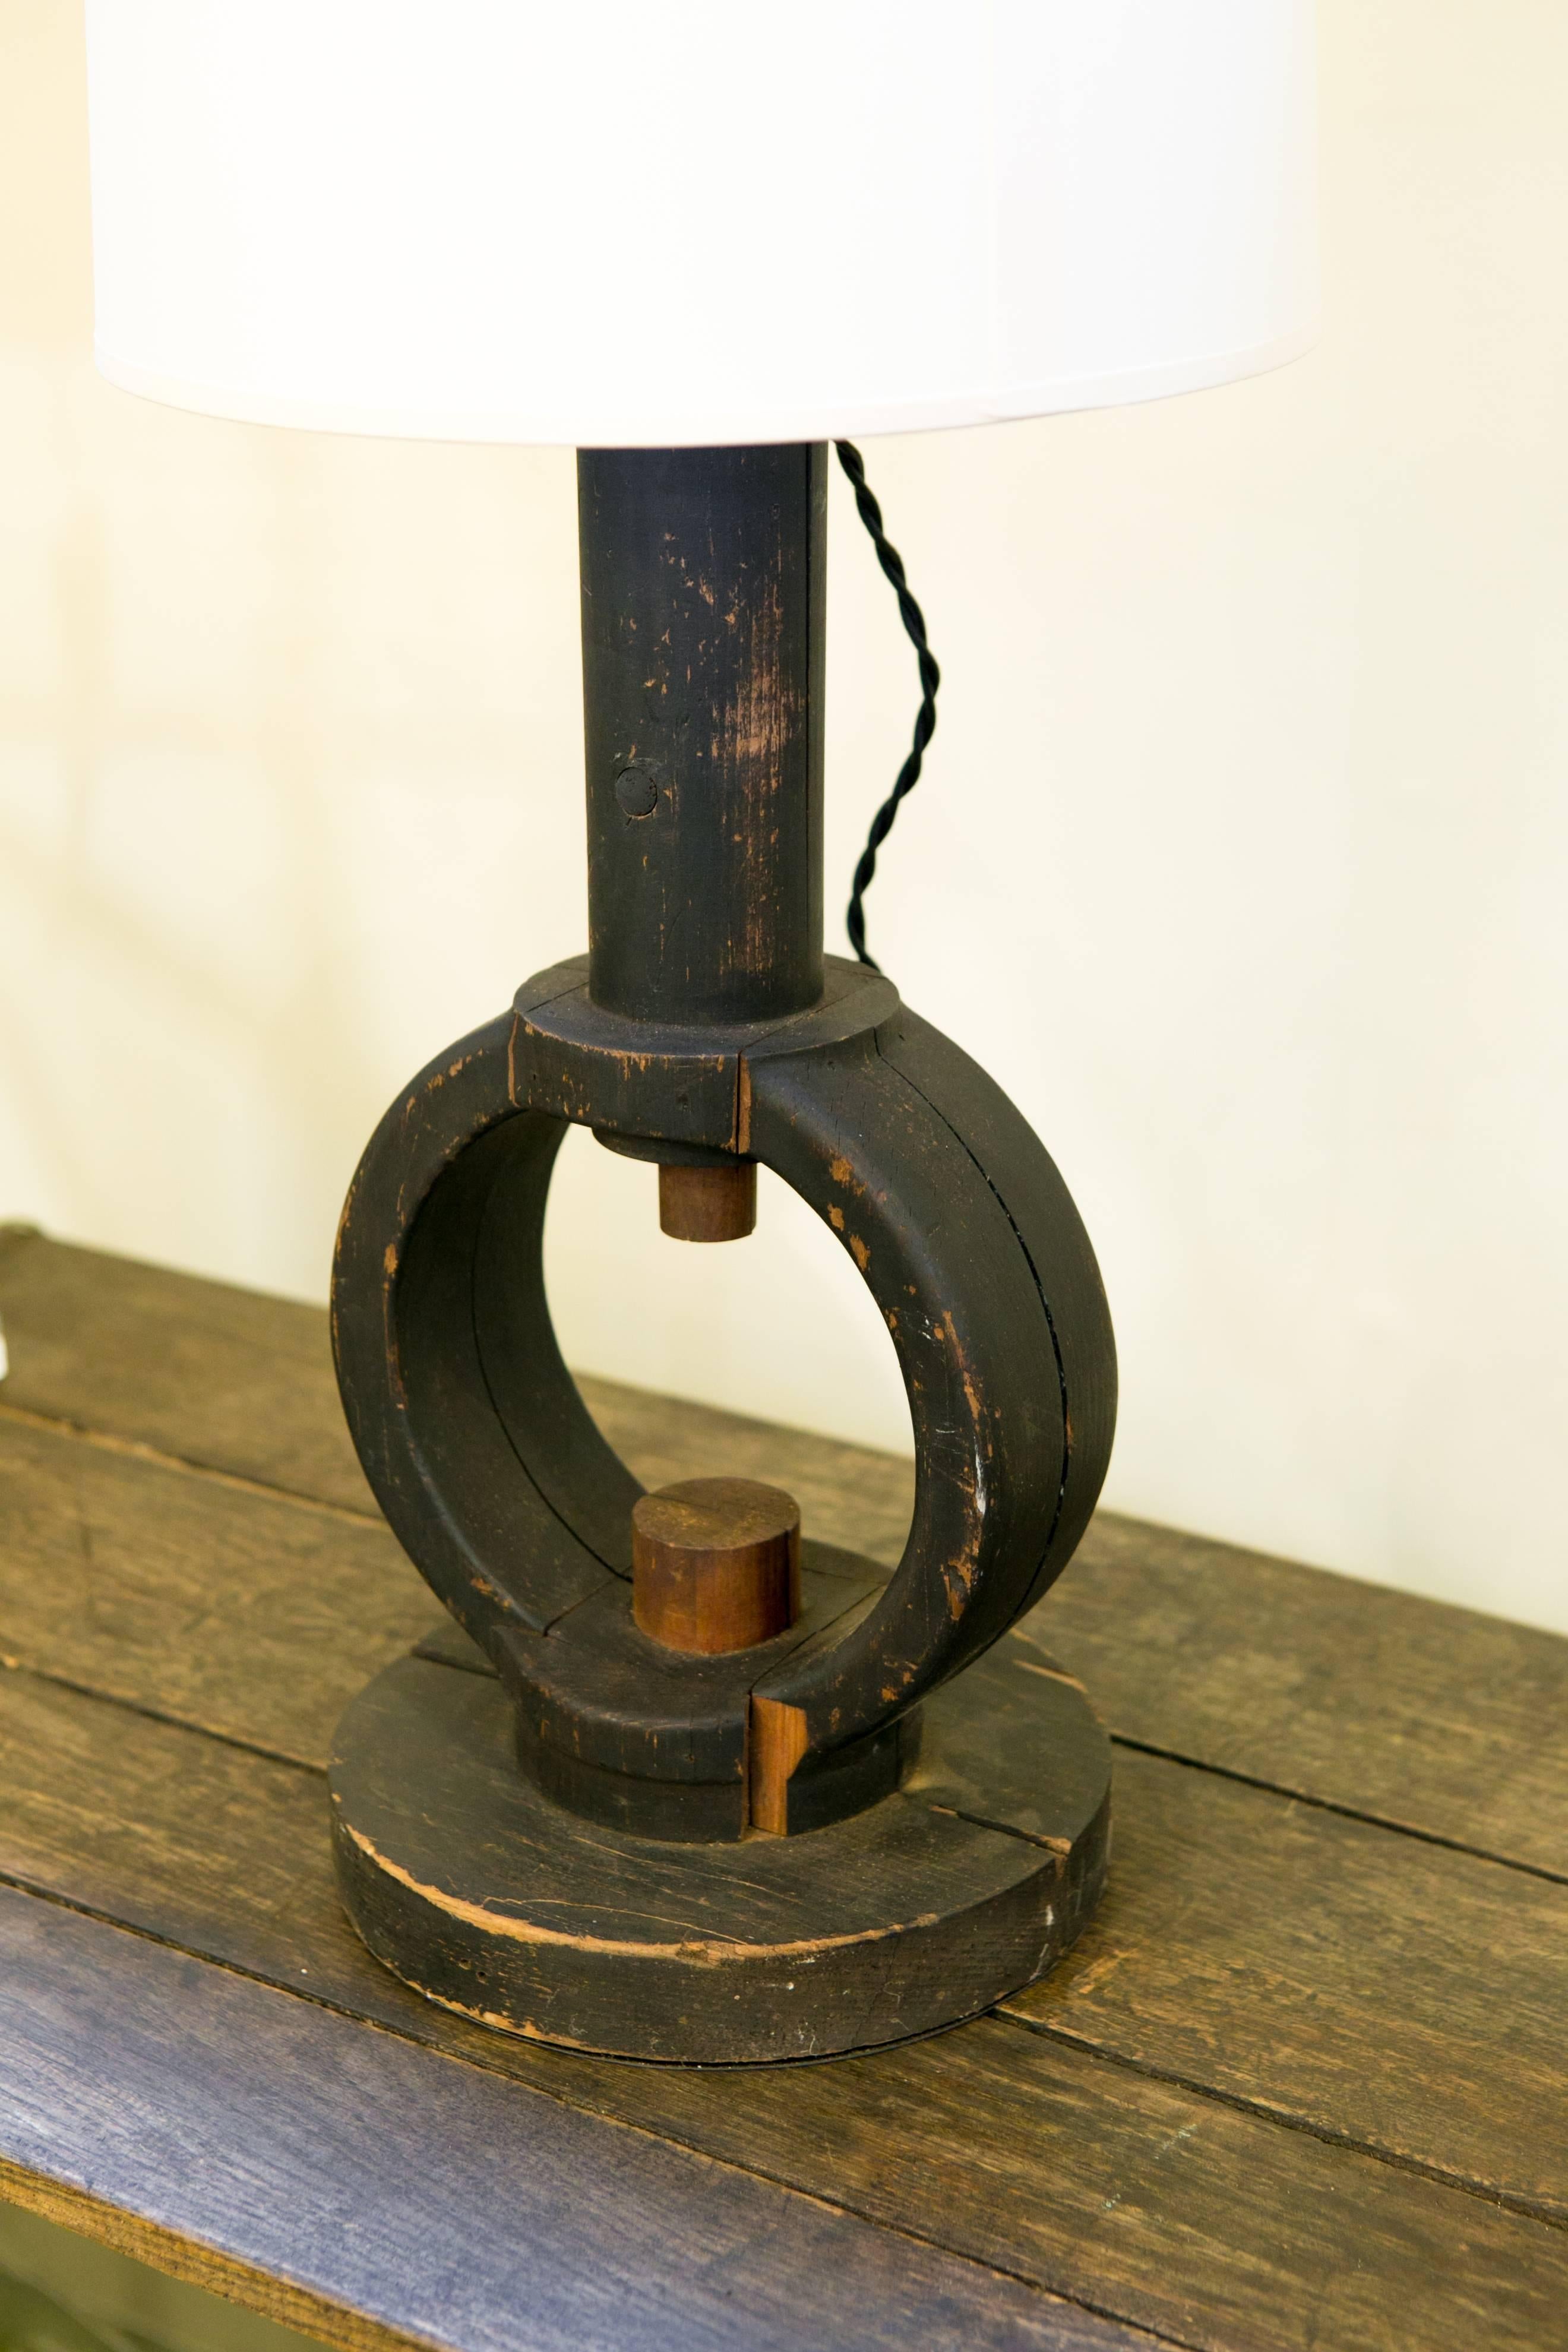 Unusual, one of a kind, handcrafted painted black wood table lamp from Belgium. Made from antique parts, newly wired with all UL listed components and a black fabric twisted cord. Harp and saddle configuration with a single Edison based socket. Sold